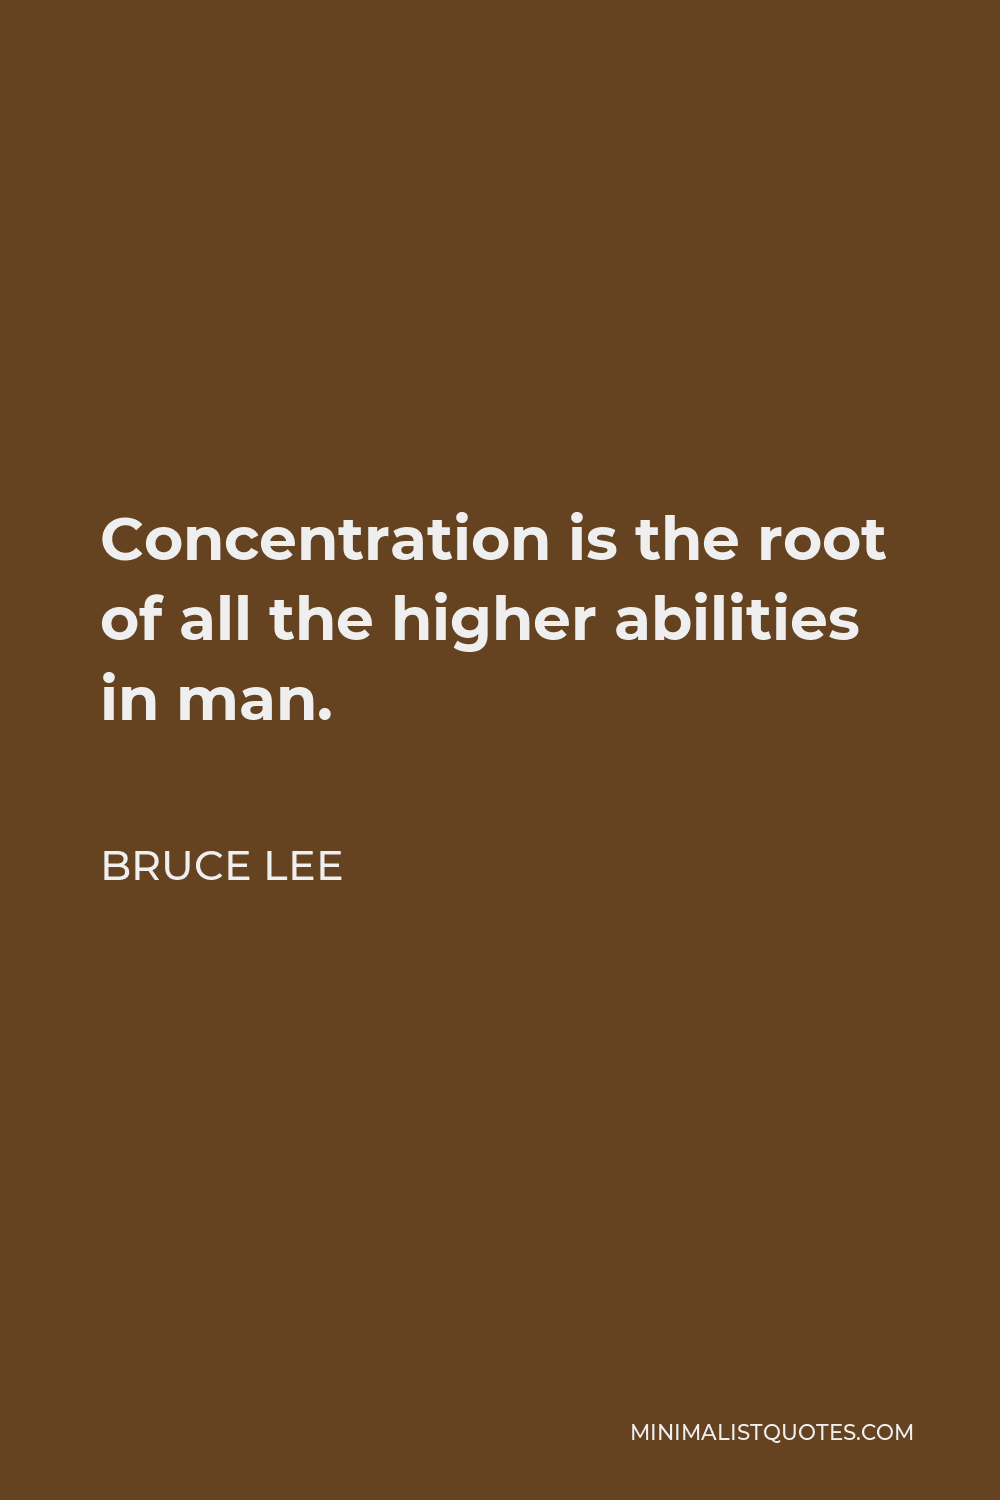 Bruce Lee Quote - Concentration is the root of all the higher abilities in man.